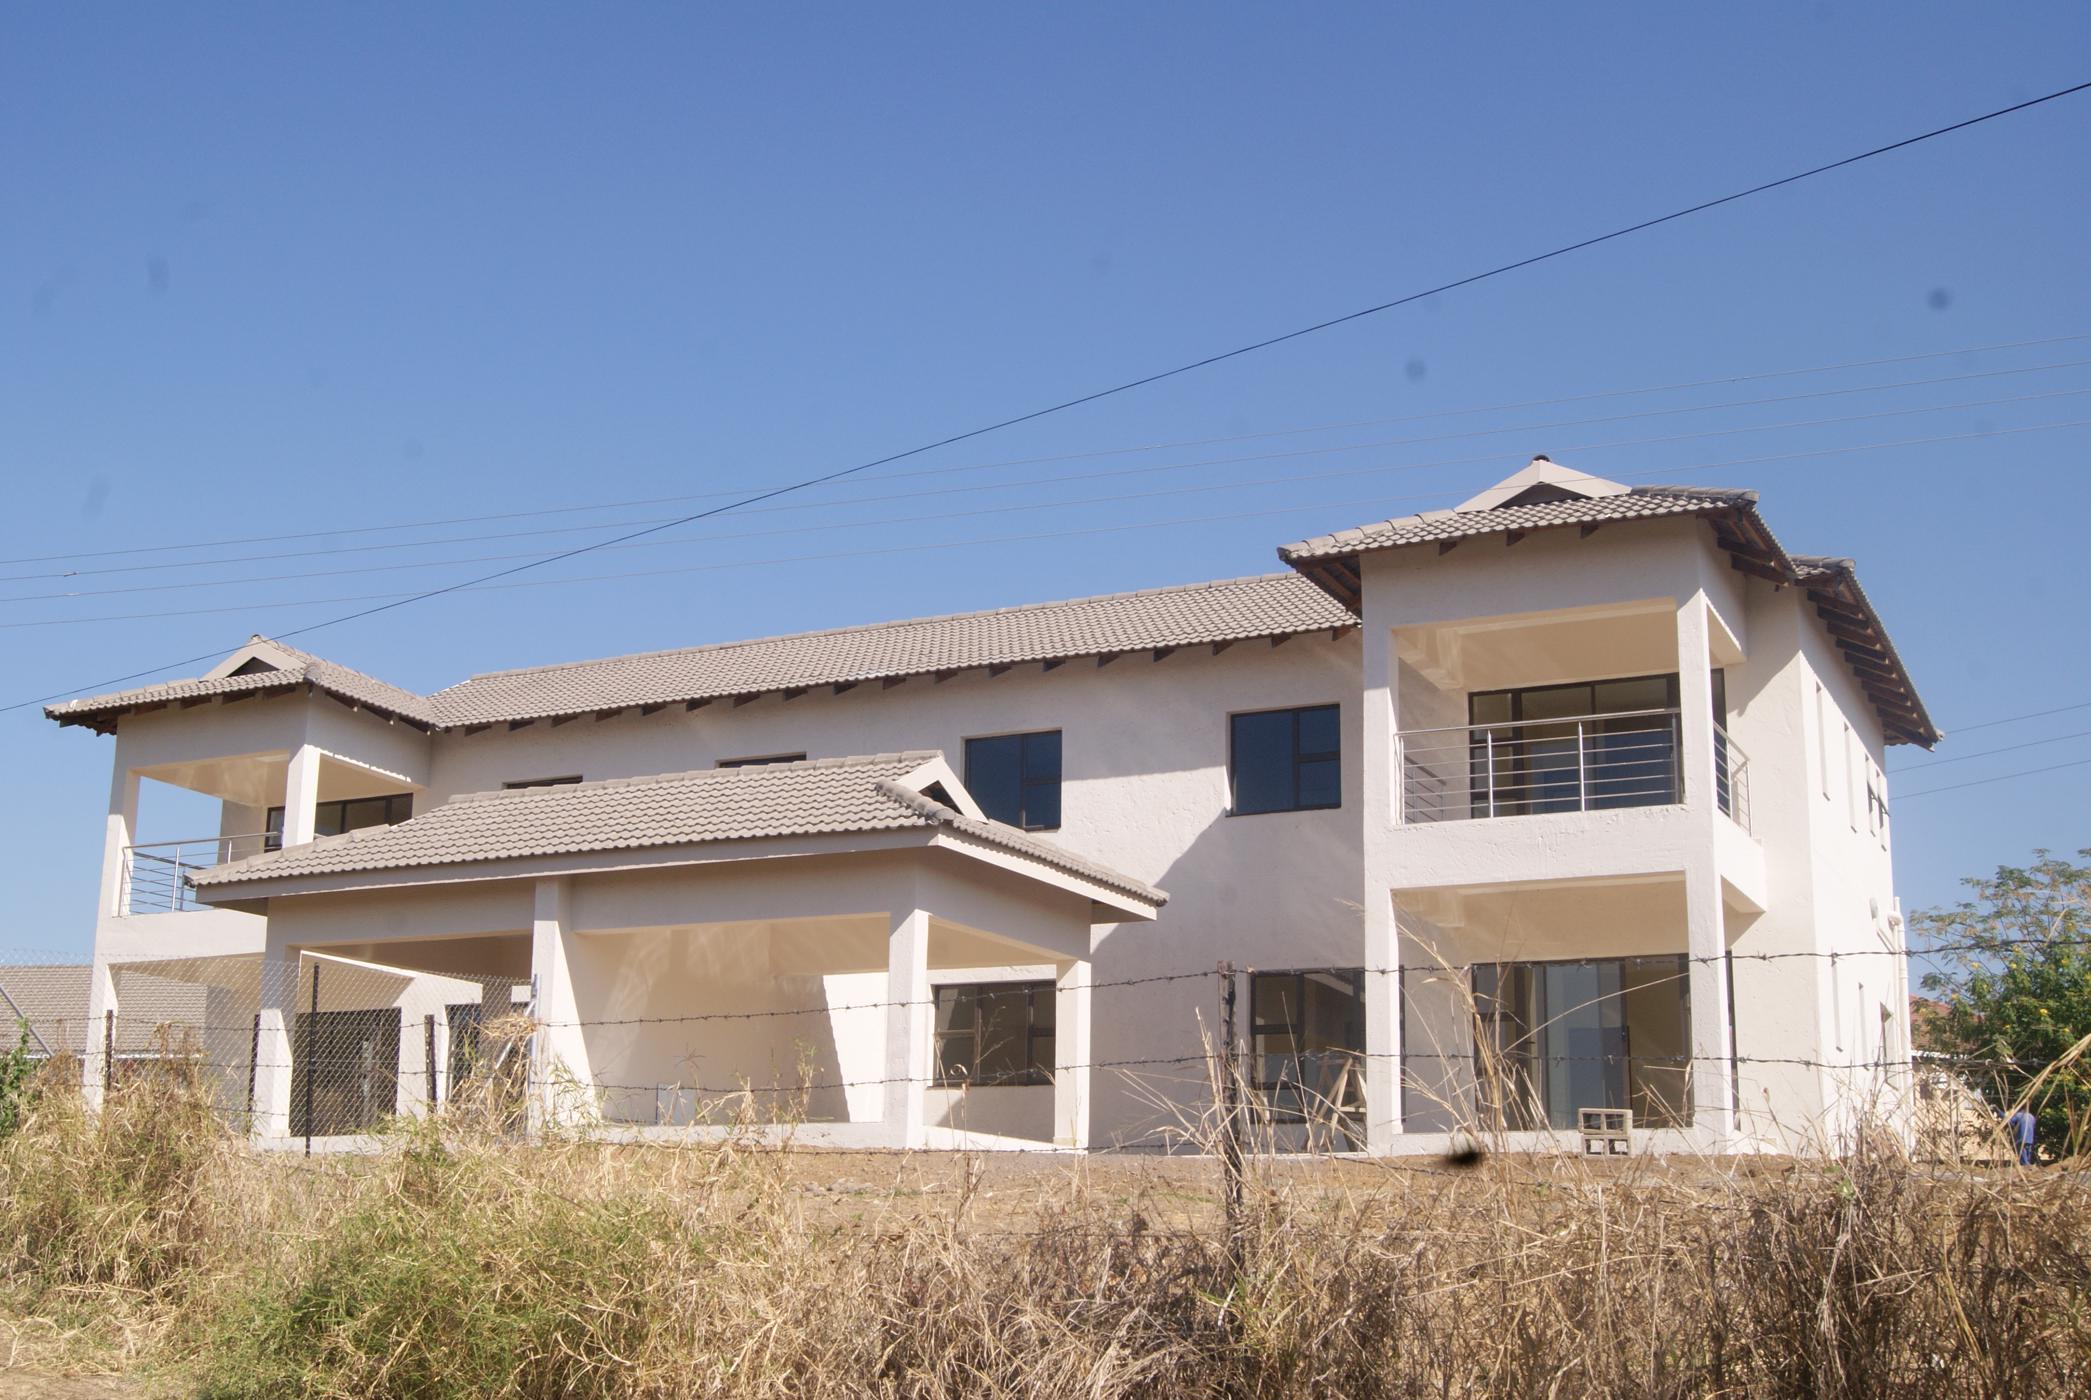 3 bedroom double-storey apartment for sale in Tubungu (Swaziland)